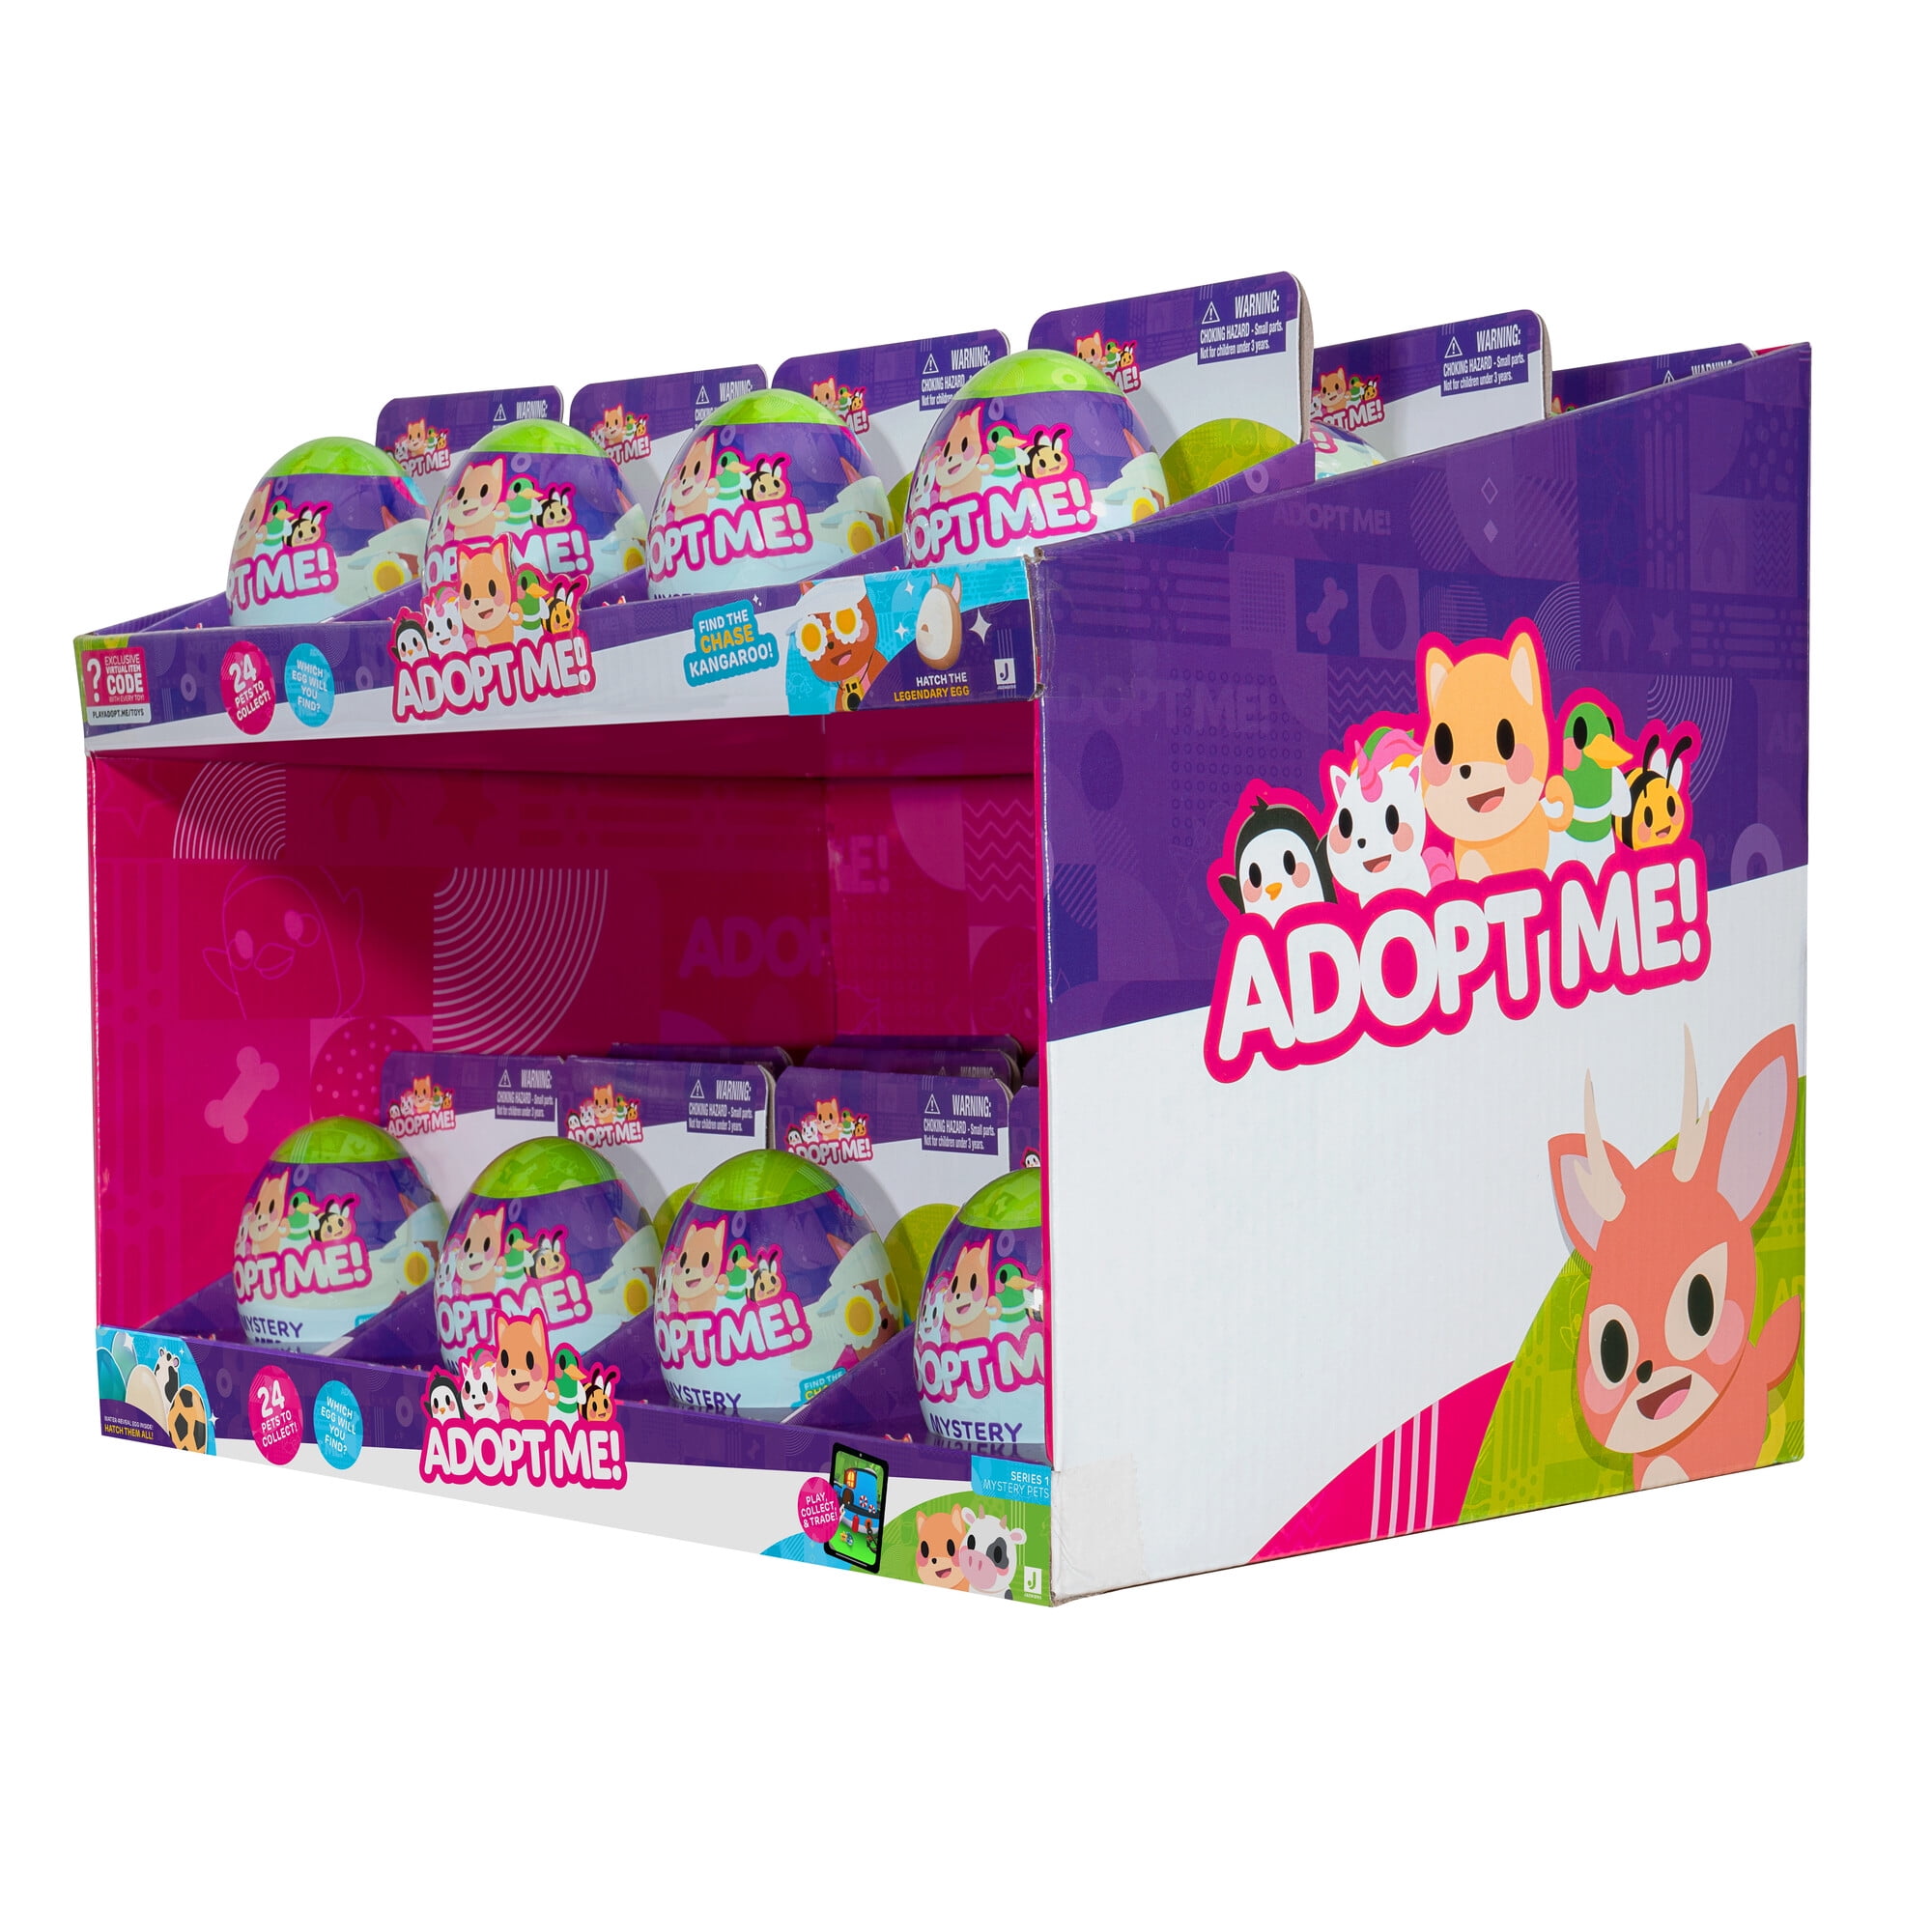  Adopt Me! 5” Surprise Plush - 12 Styles - Series 2 - Exclusive  Virtual Item Code Included - Fun Collectible Toys for Kids Featuring Your  Favorite Adopt Me Pets, Ages 6+ : Toys & Games